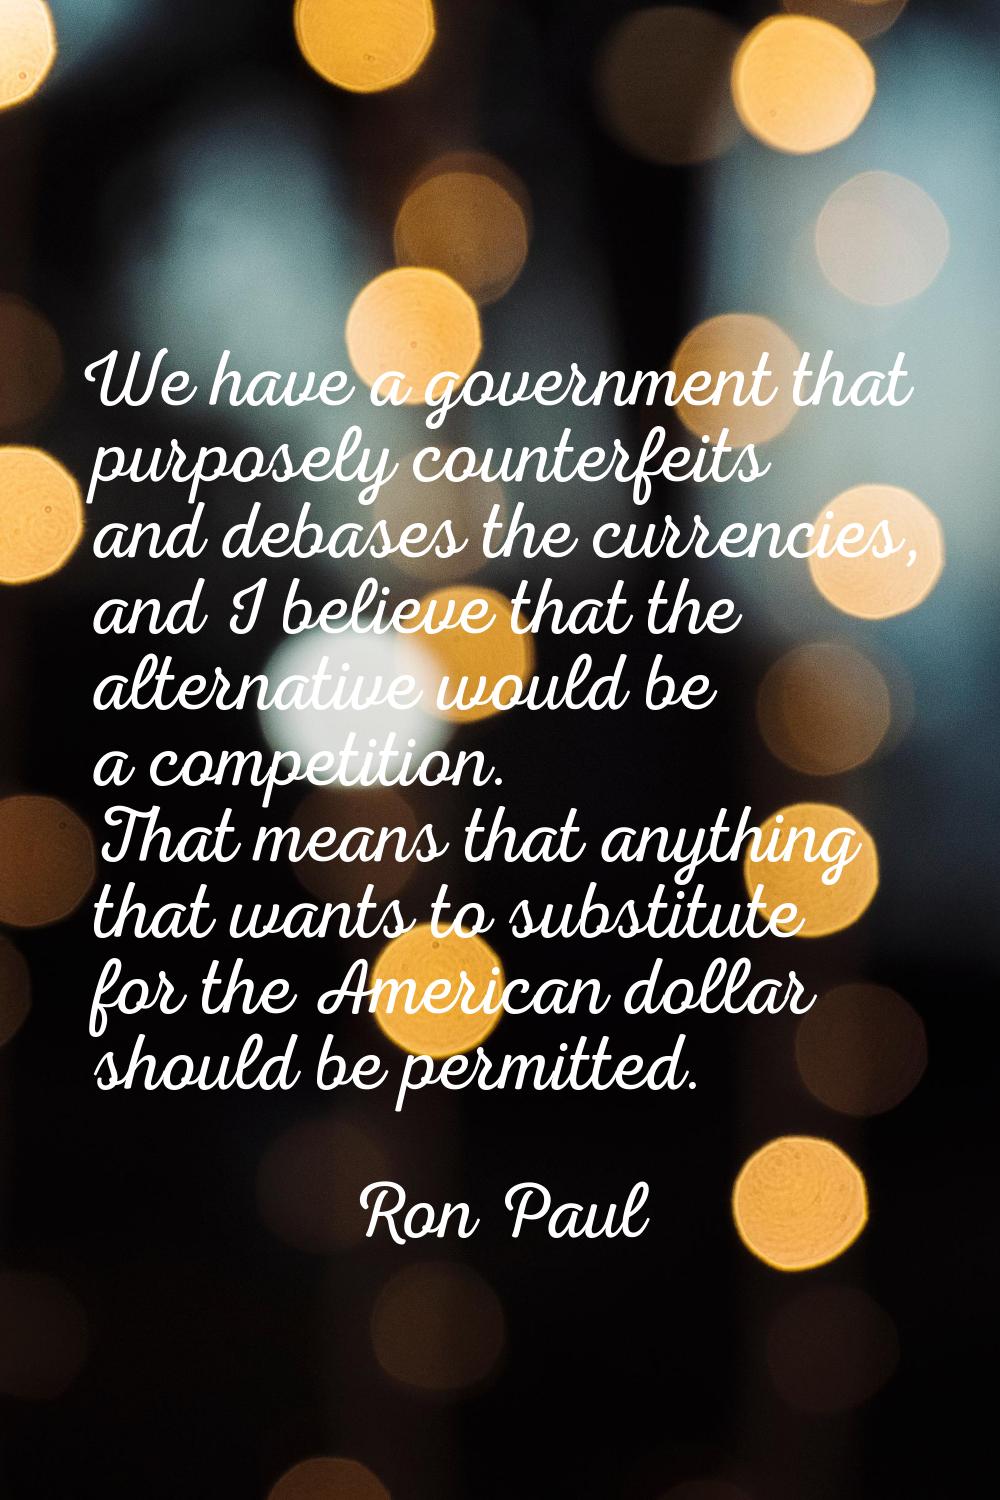 We have a government that purposely counterfeits and debases the currencies, and I believe that the